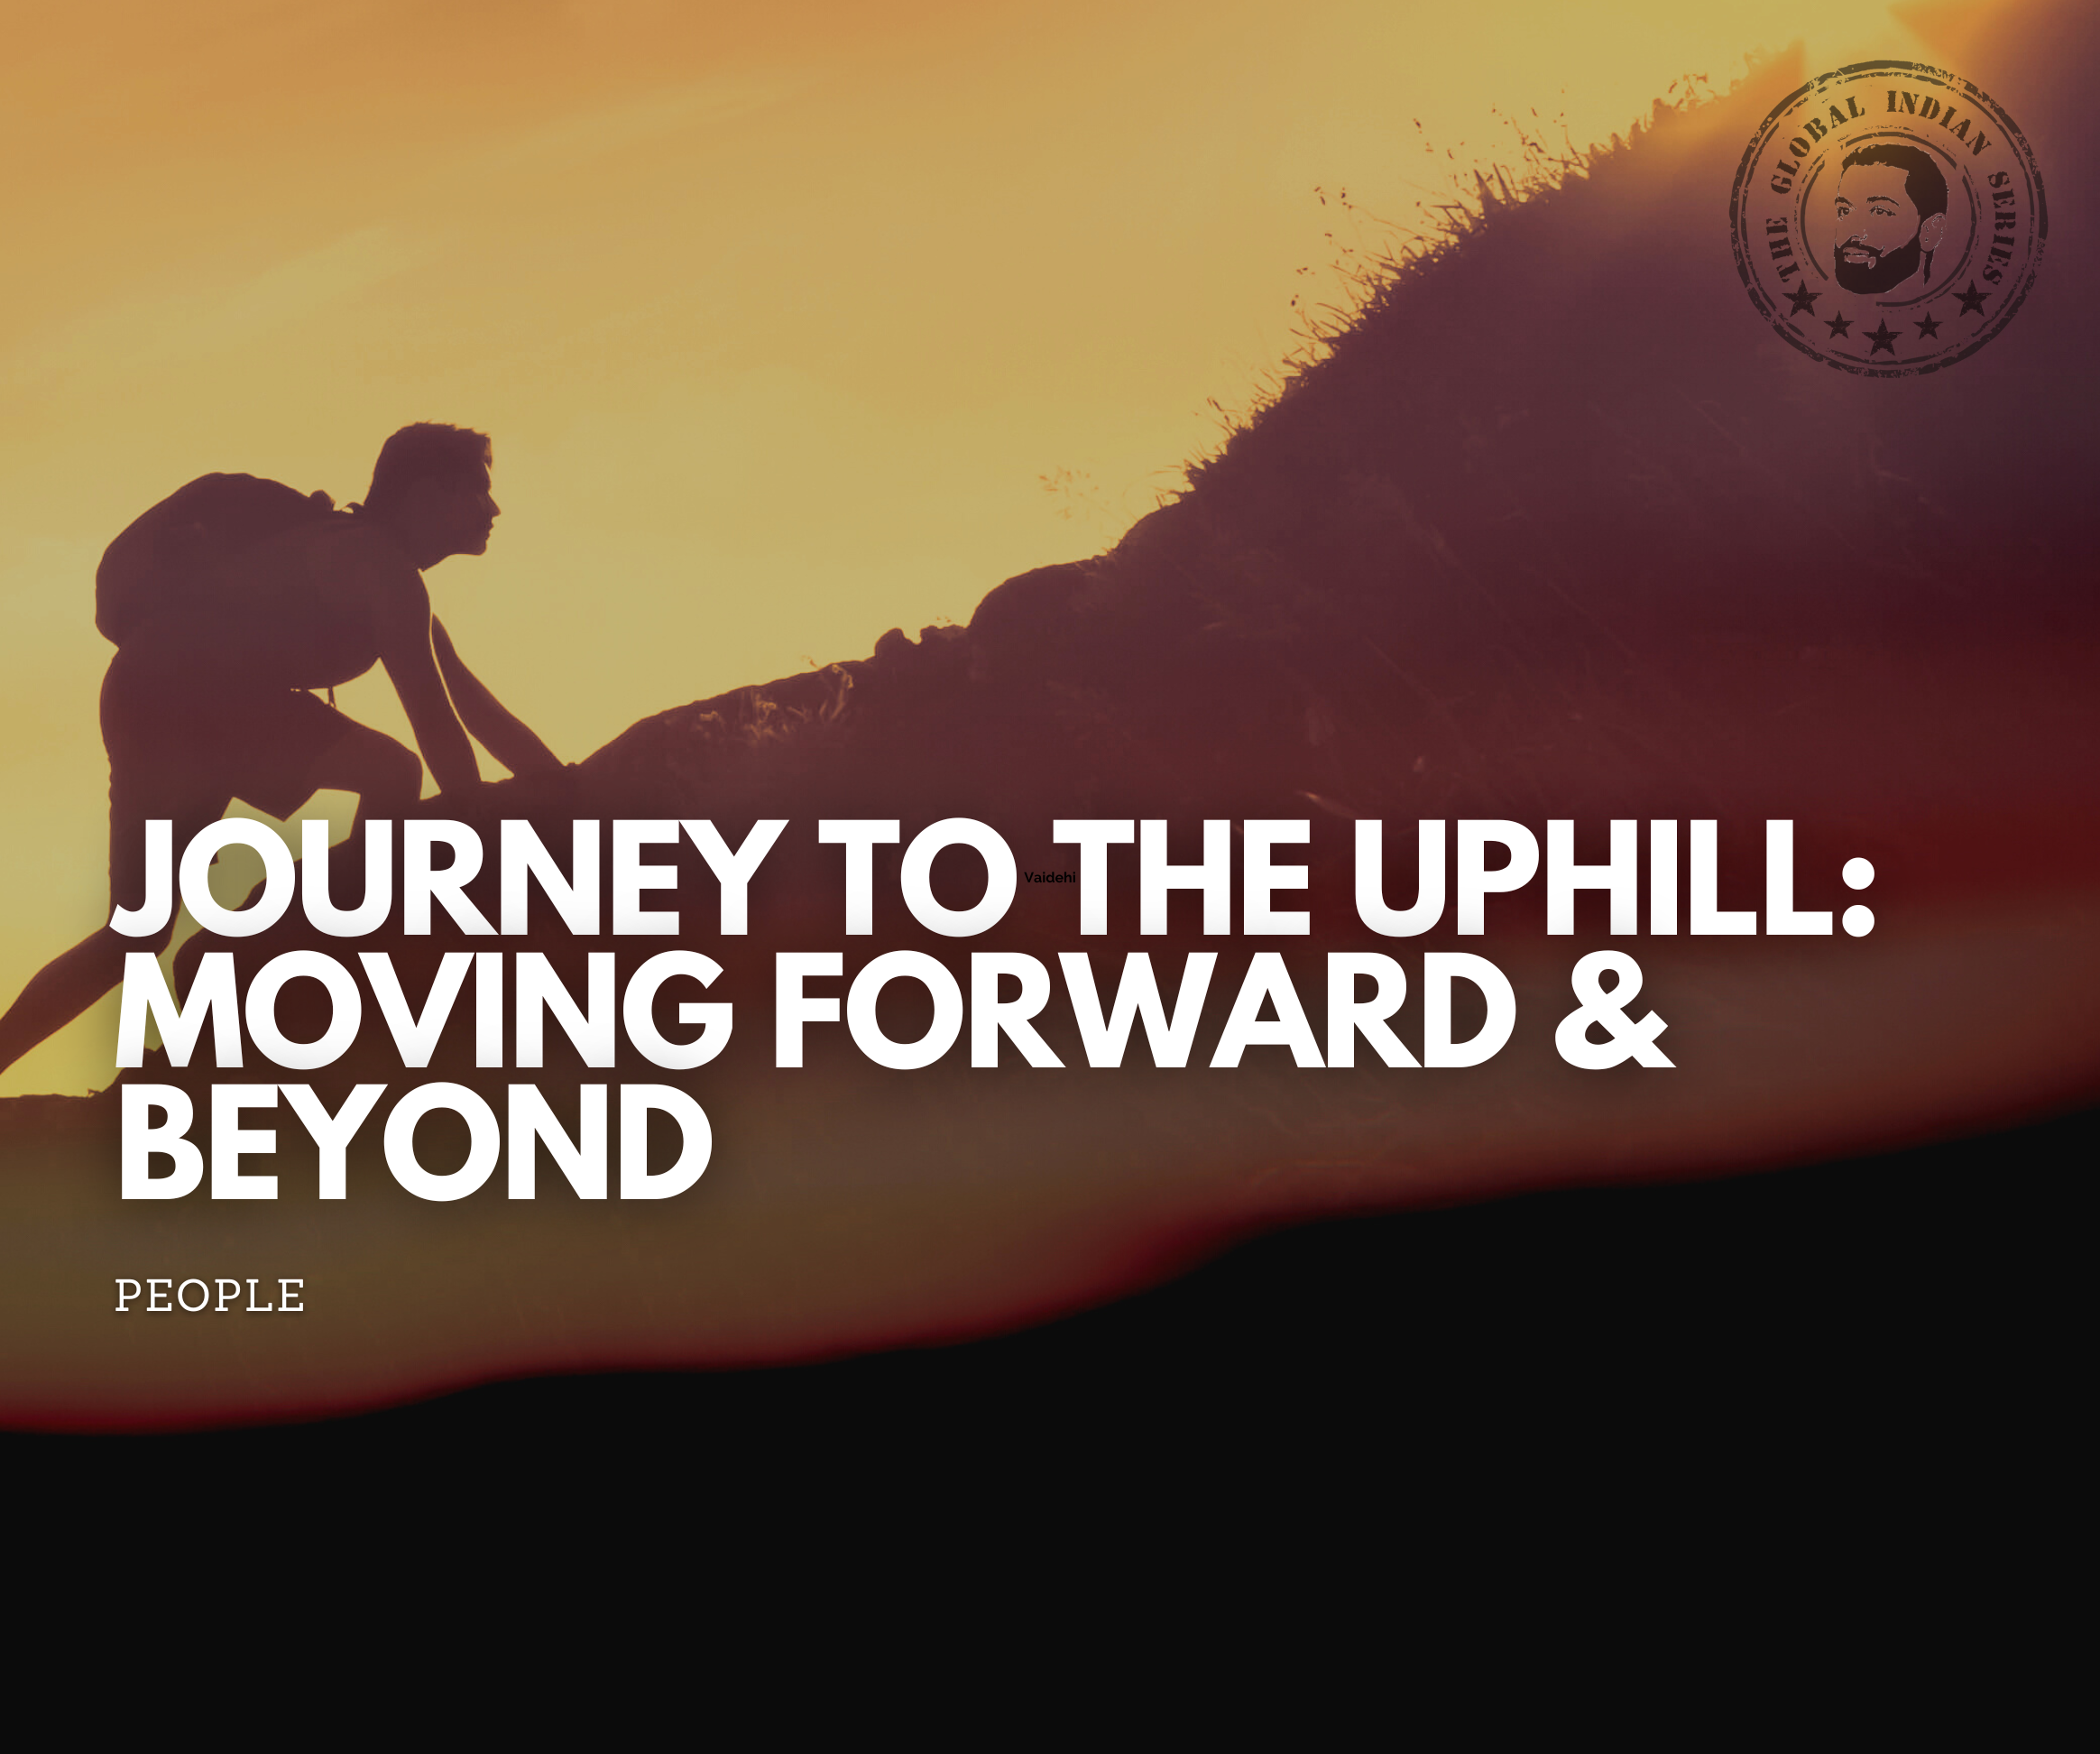 JOURNEY TO THE UPHILL: MOVING FORWARD & BEYOND